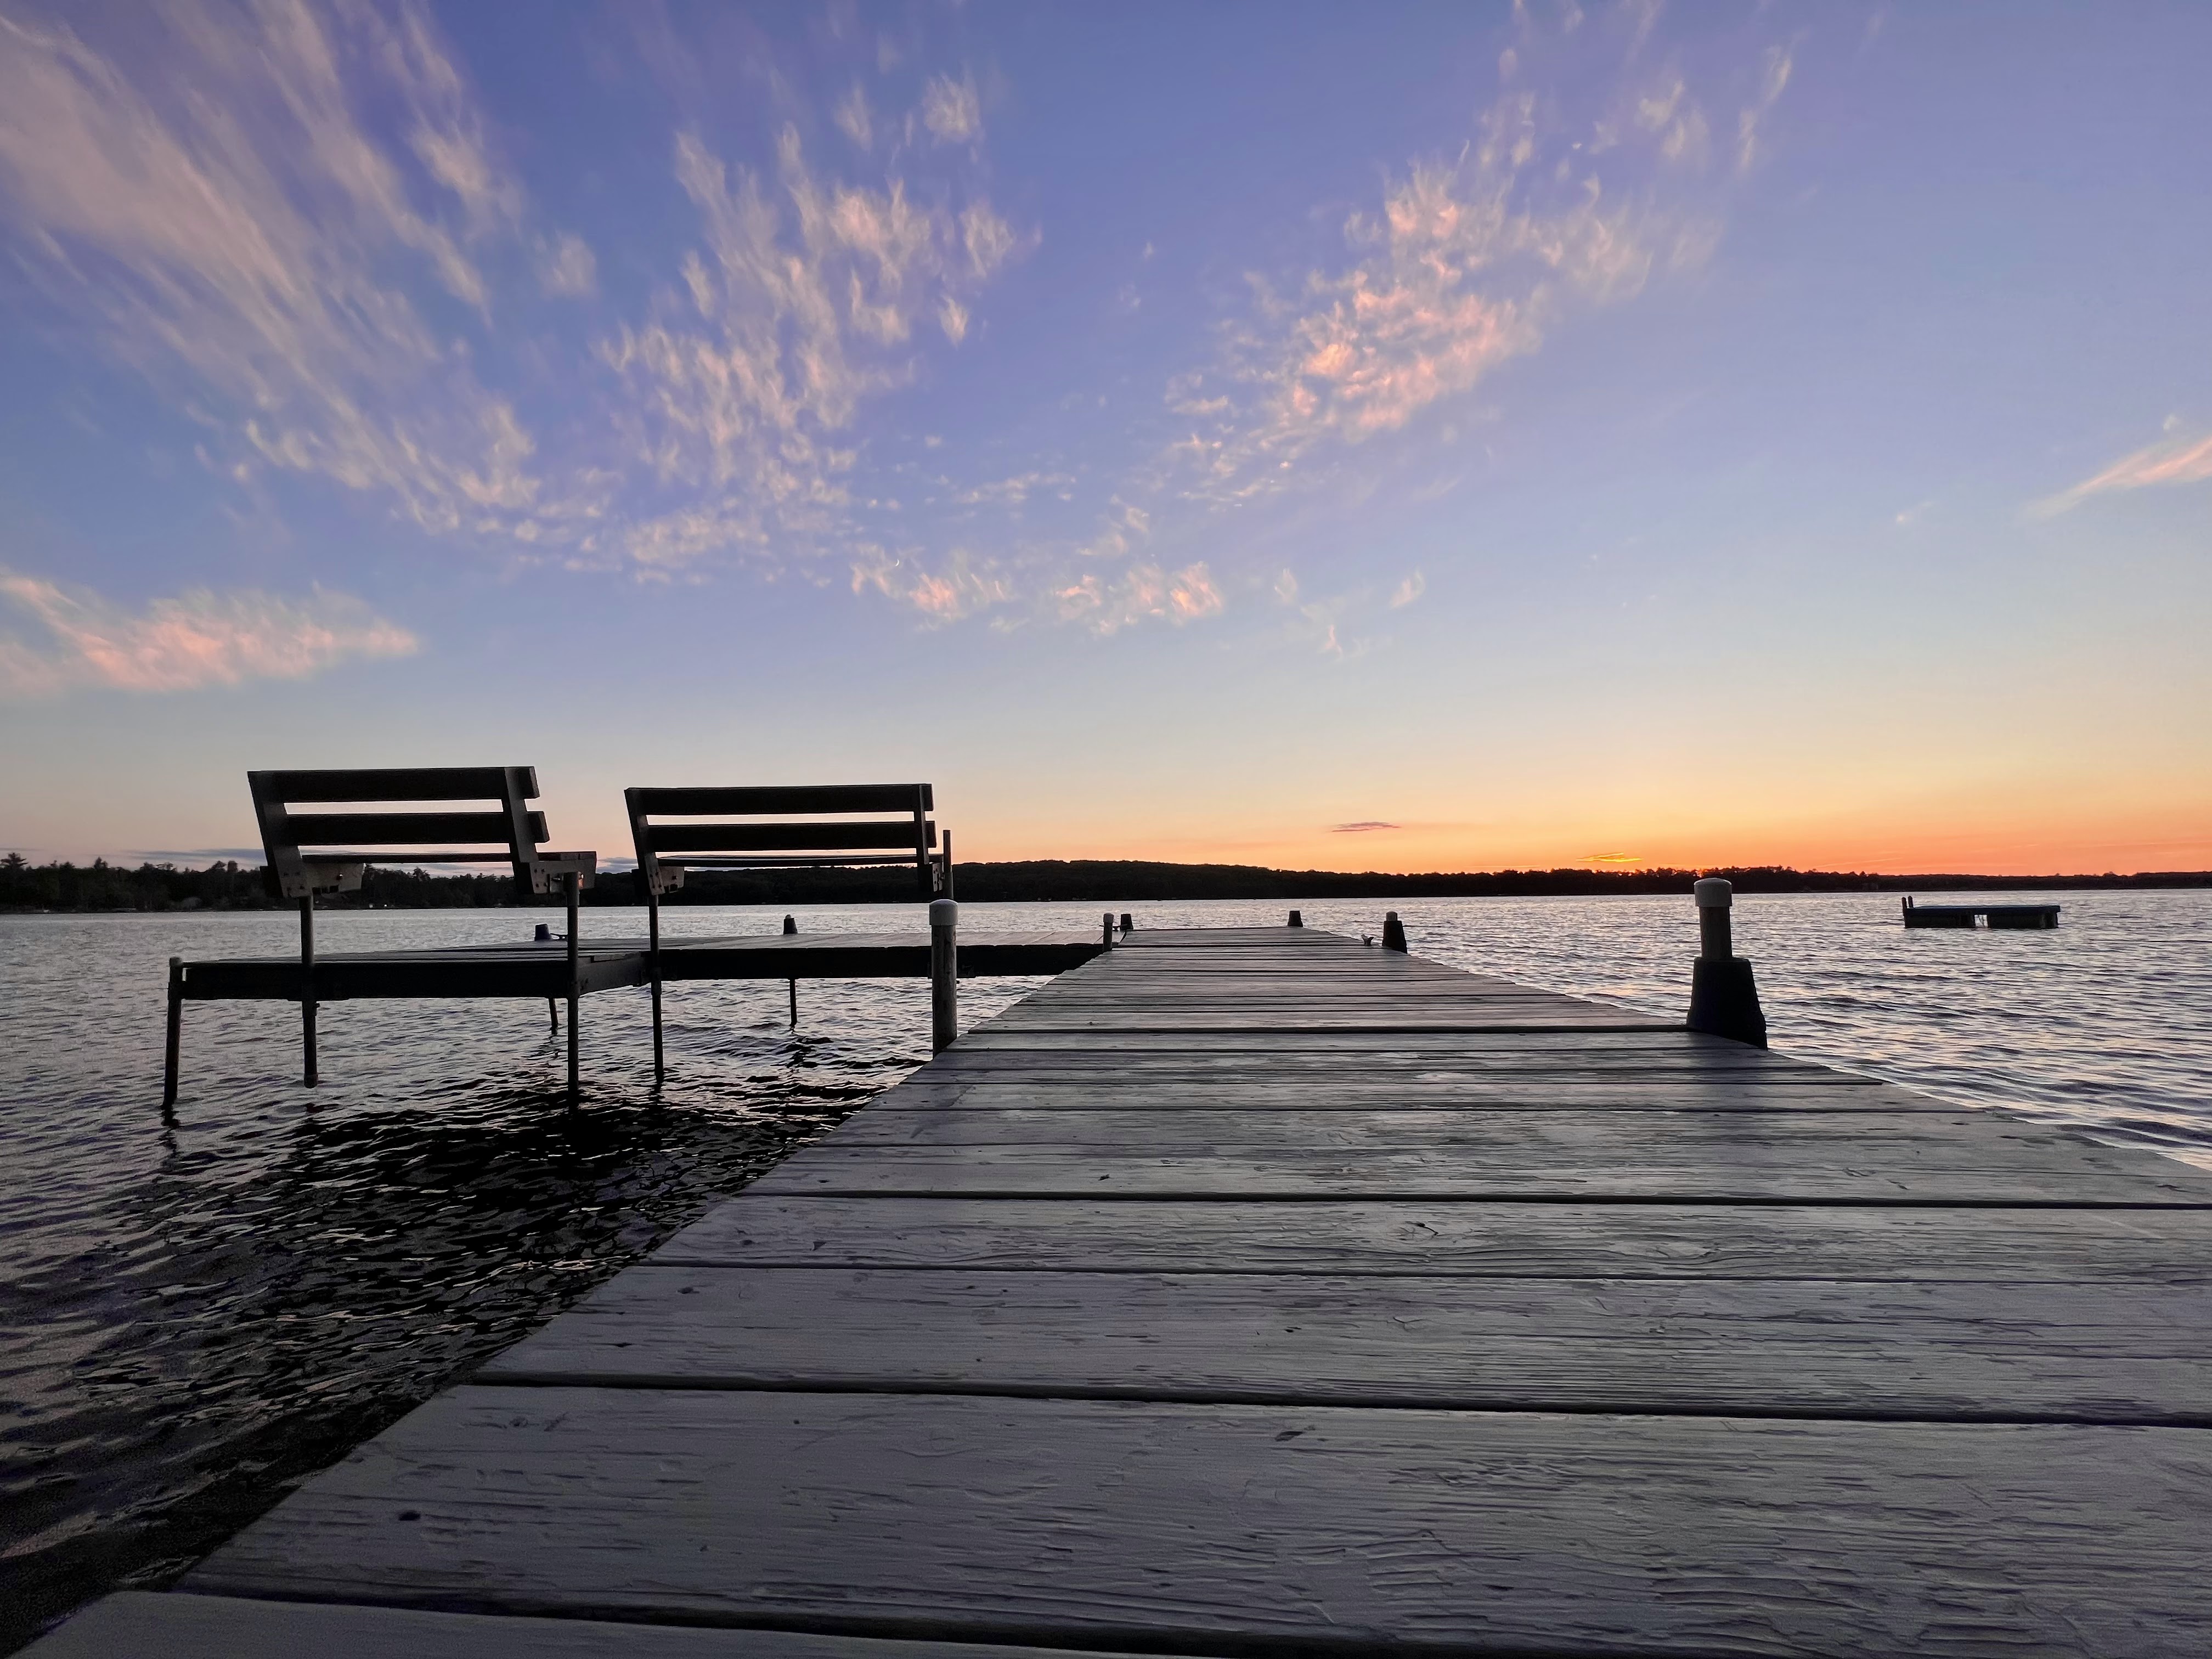 Artisitically shot from the base of an L shaped wooden pier, looking out over the water the pier reaches in front of you with two benches flanking L to the left, their silhouettes standing prominently. The lake water below is choppy. Above the deep blue sky fades to a vibrant orange on the horizon as the sun has already set. A few clouds dot the sky in shades of soft pink.